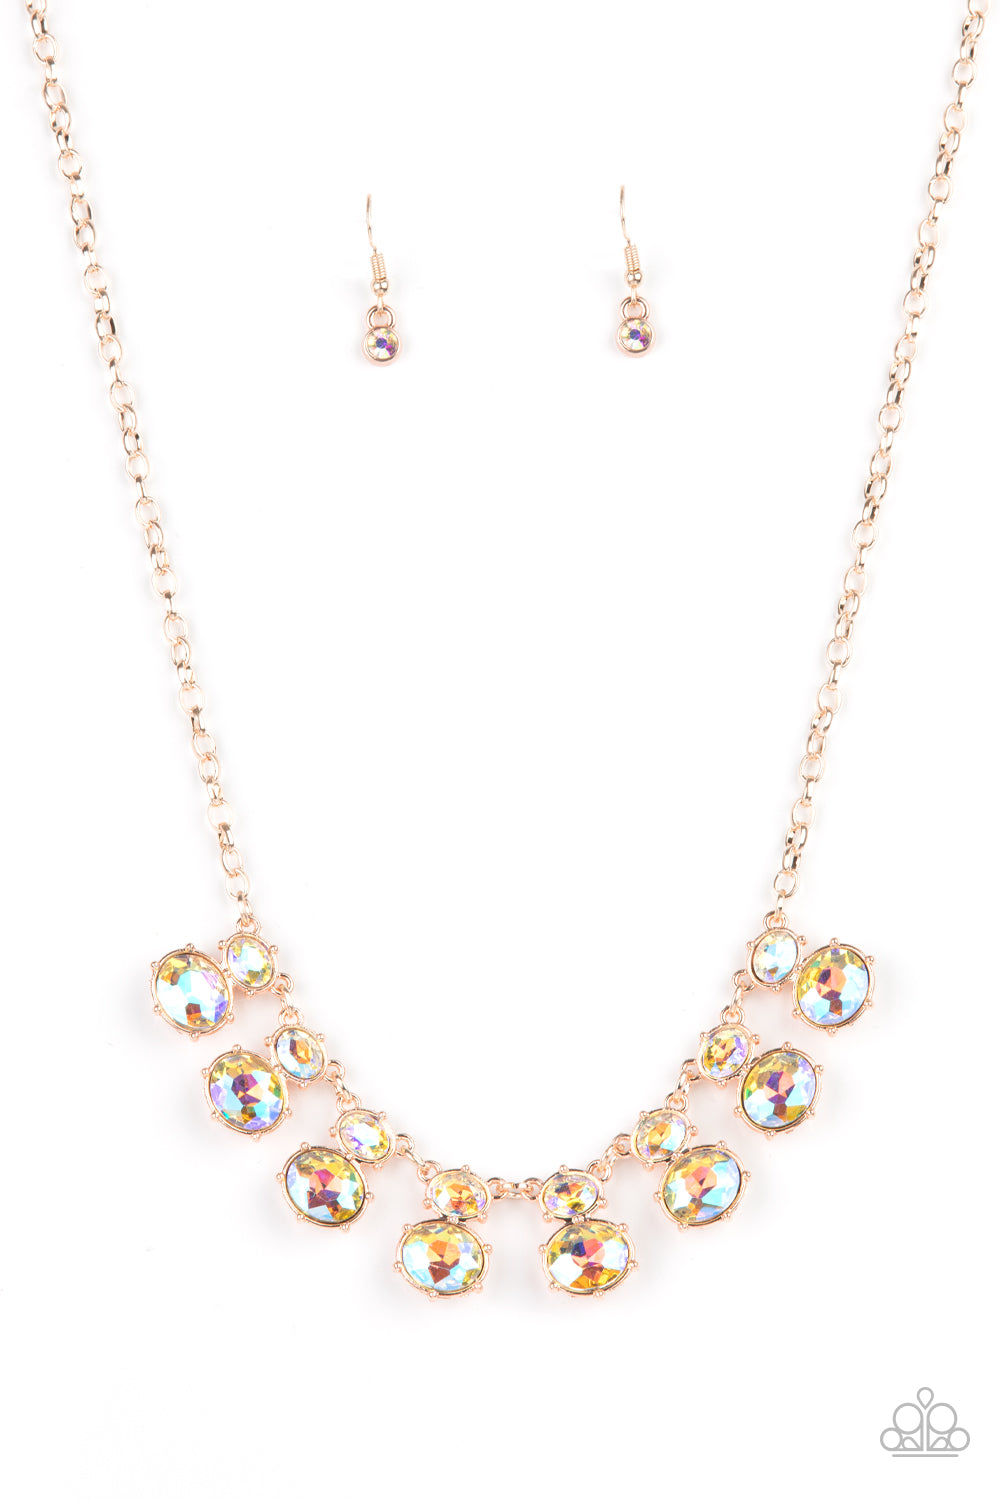 Paparazzi Cosmic Countess Rose Gold Short Necklace - Life Of The Party Exclusive July 2021